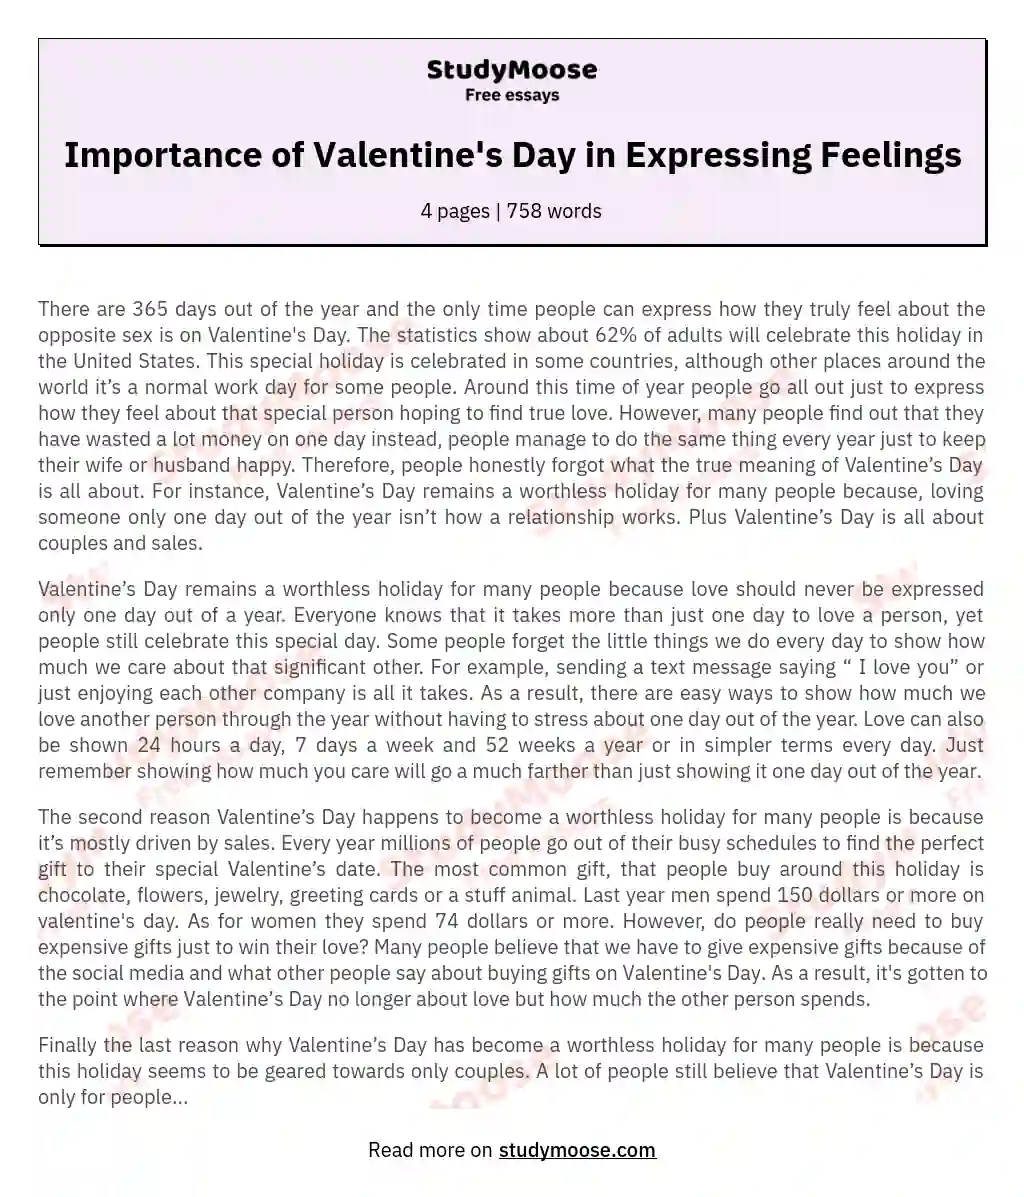 Importance of Valentine's Day in Expressing Feelings essay